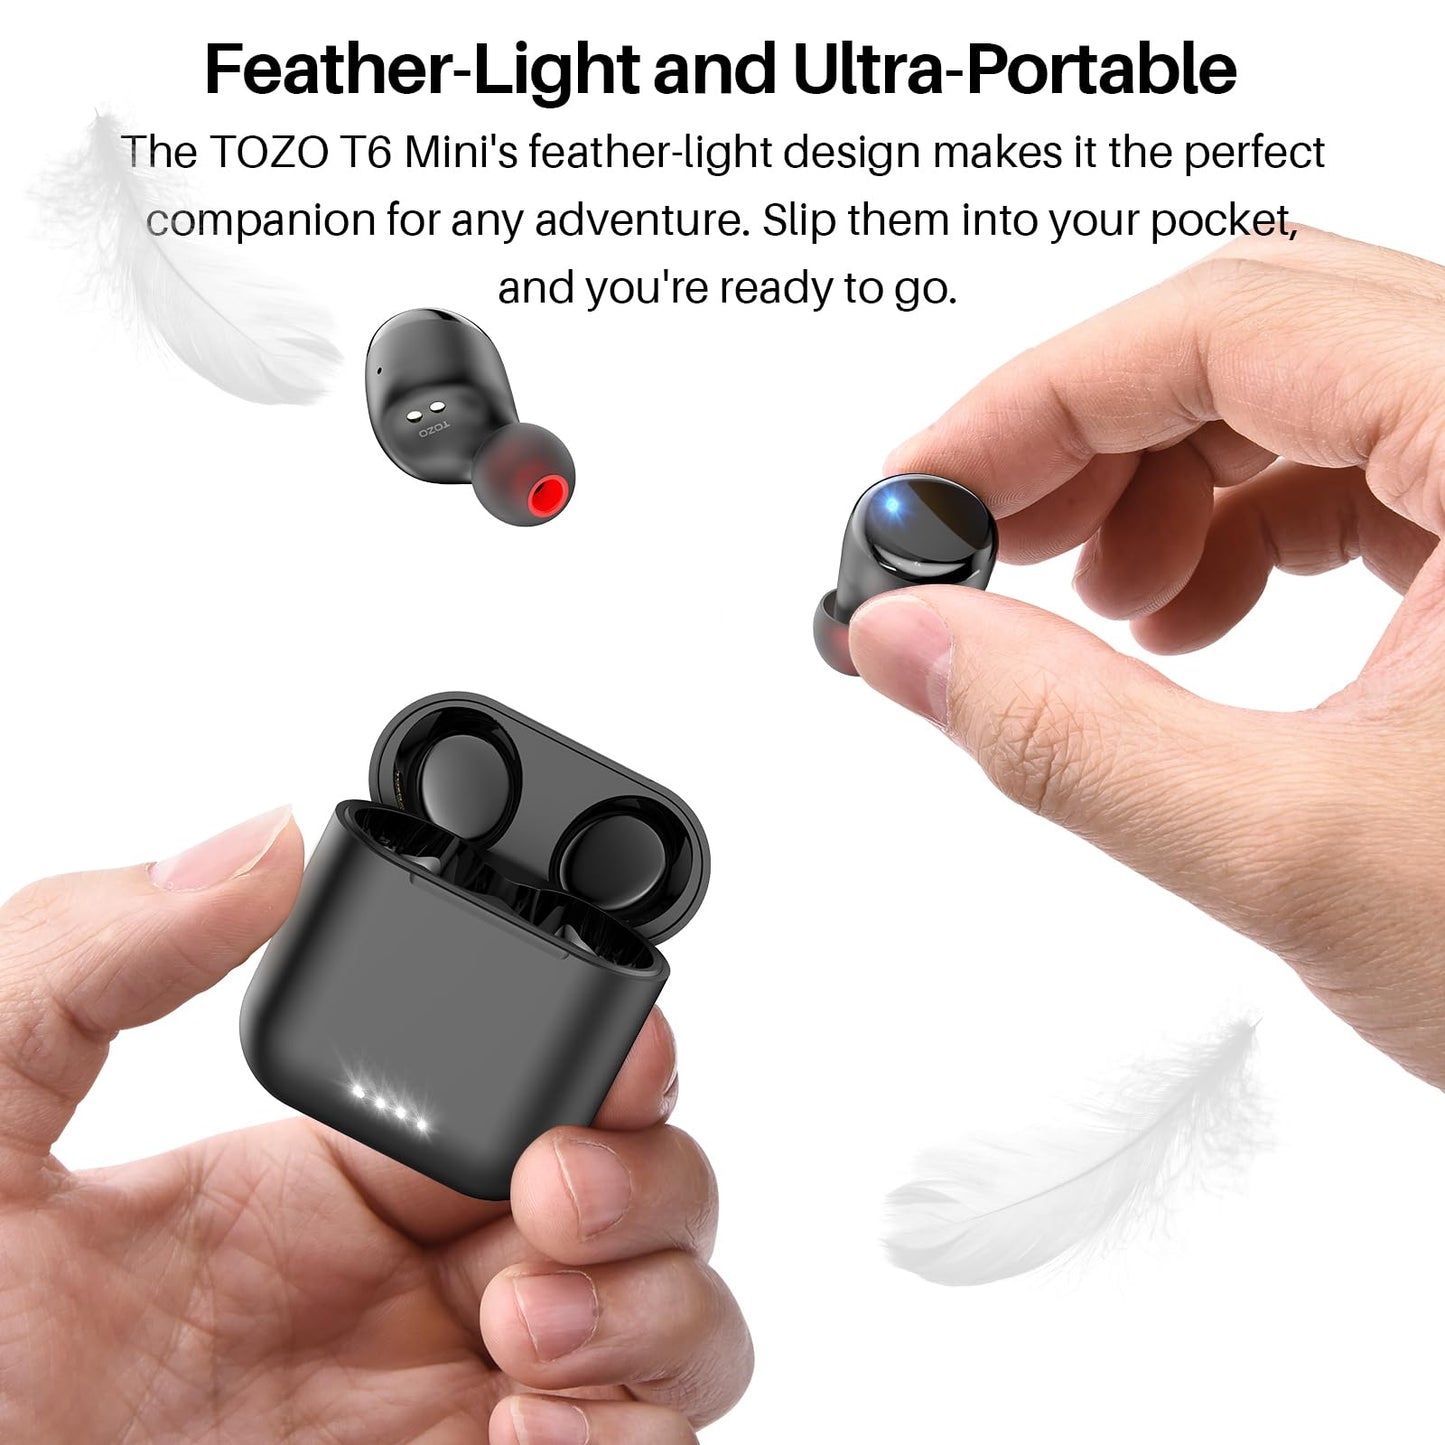 TOZO T6 Wireless Earbuds Bluetooth 5.3 Headphones, Ergonomic Design in-Ear Headset, 50Hrs Playtime with Wireless Charging Case, APP EQ Customisable, IPX8 Waterproof, New Upgraded Version